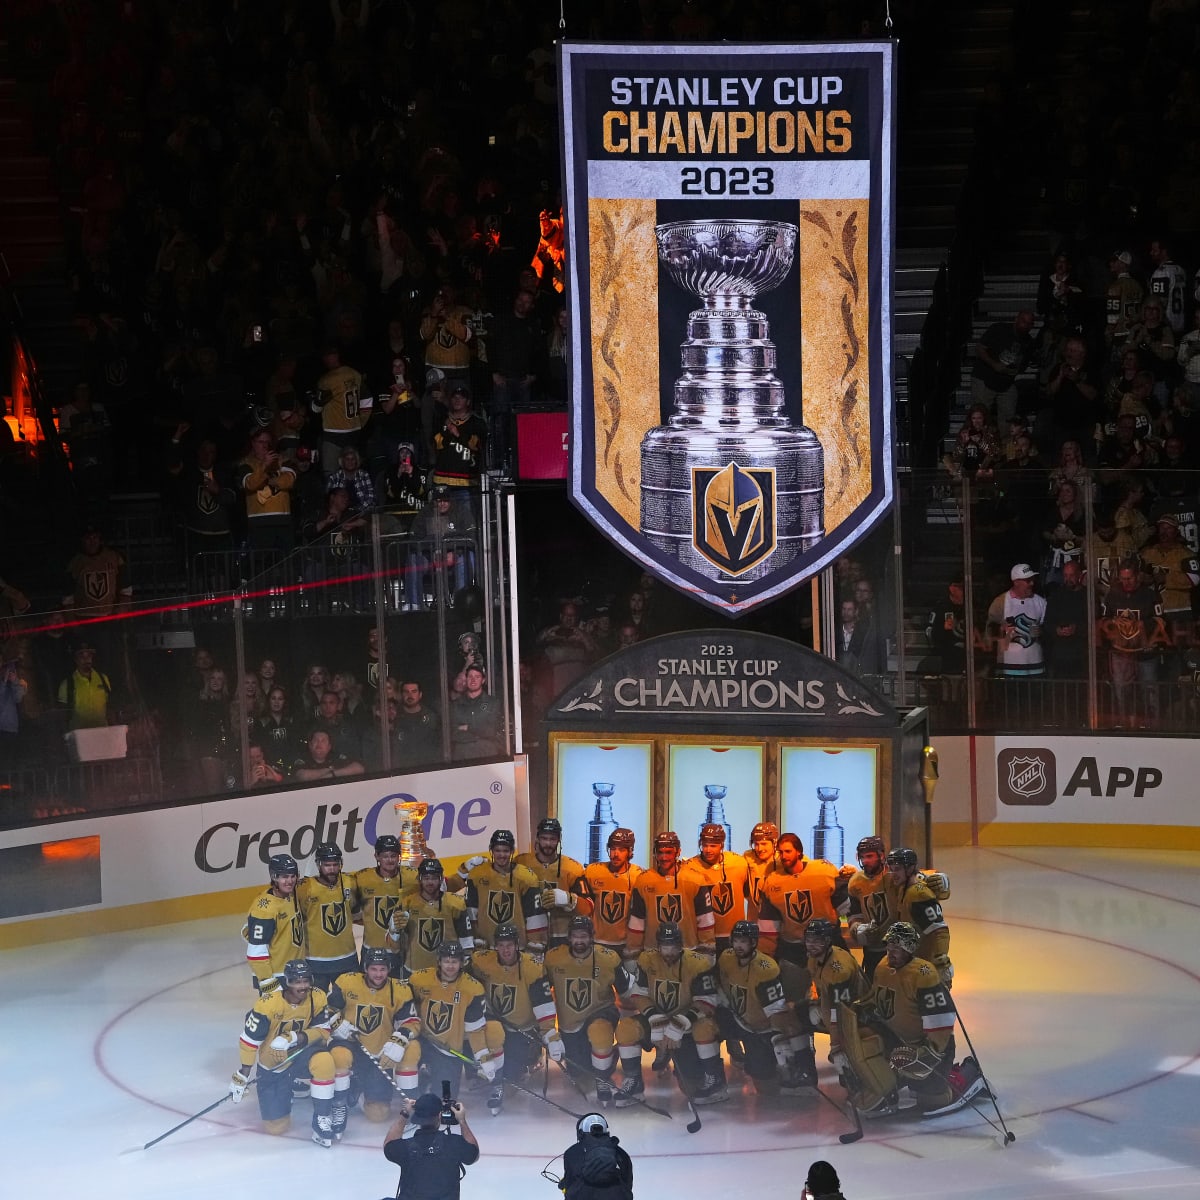 Vegas Golden Knights Champions of the Ice 2023 Stanley Cup Men